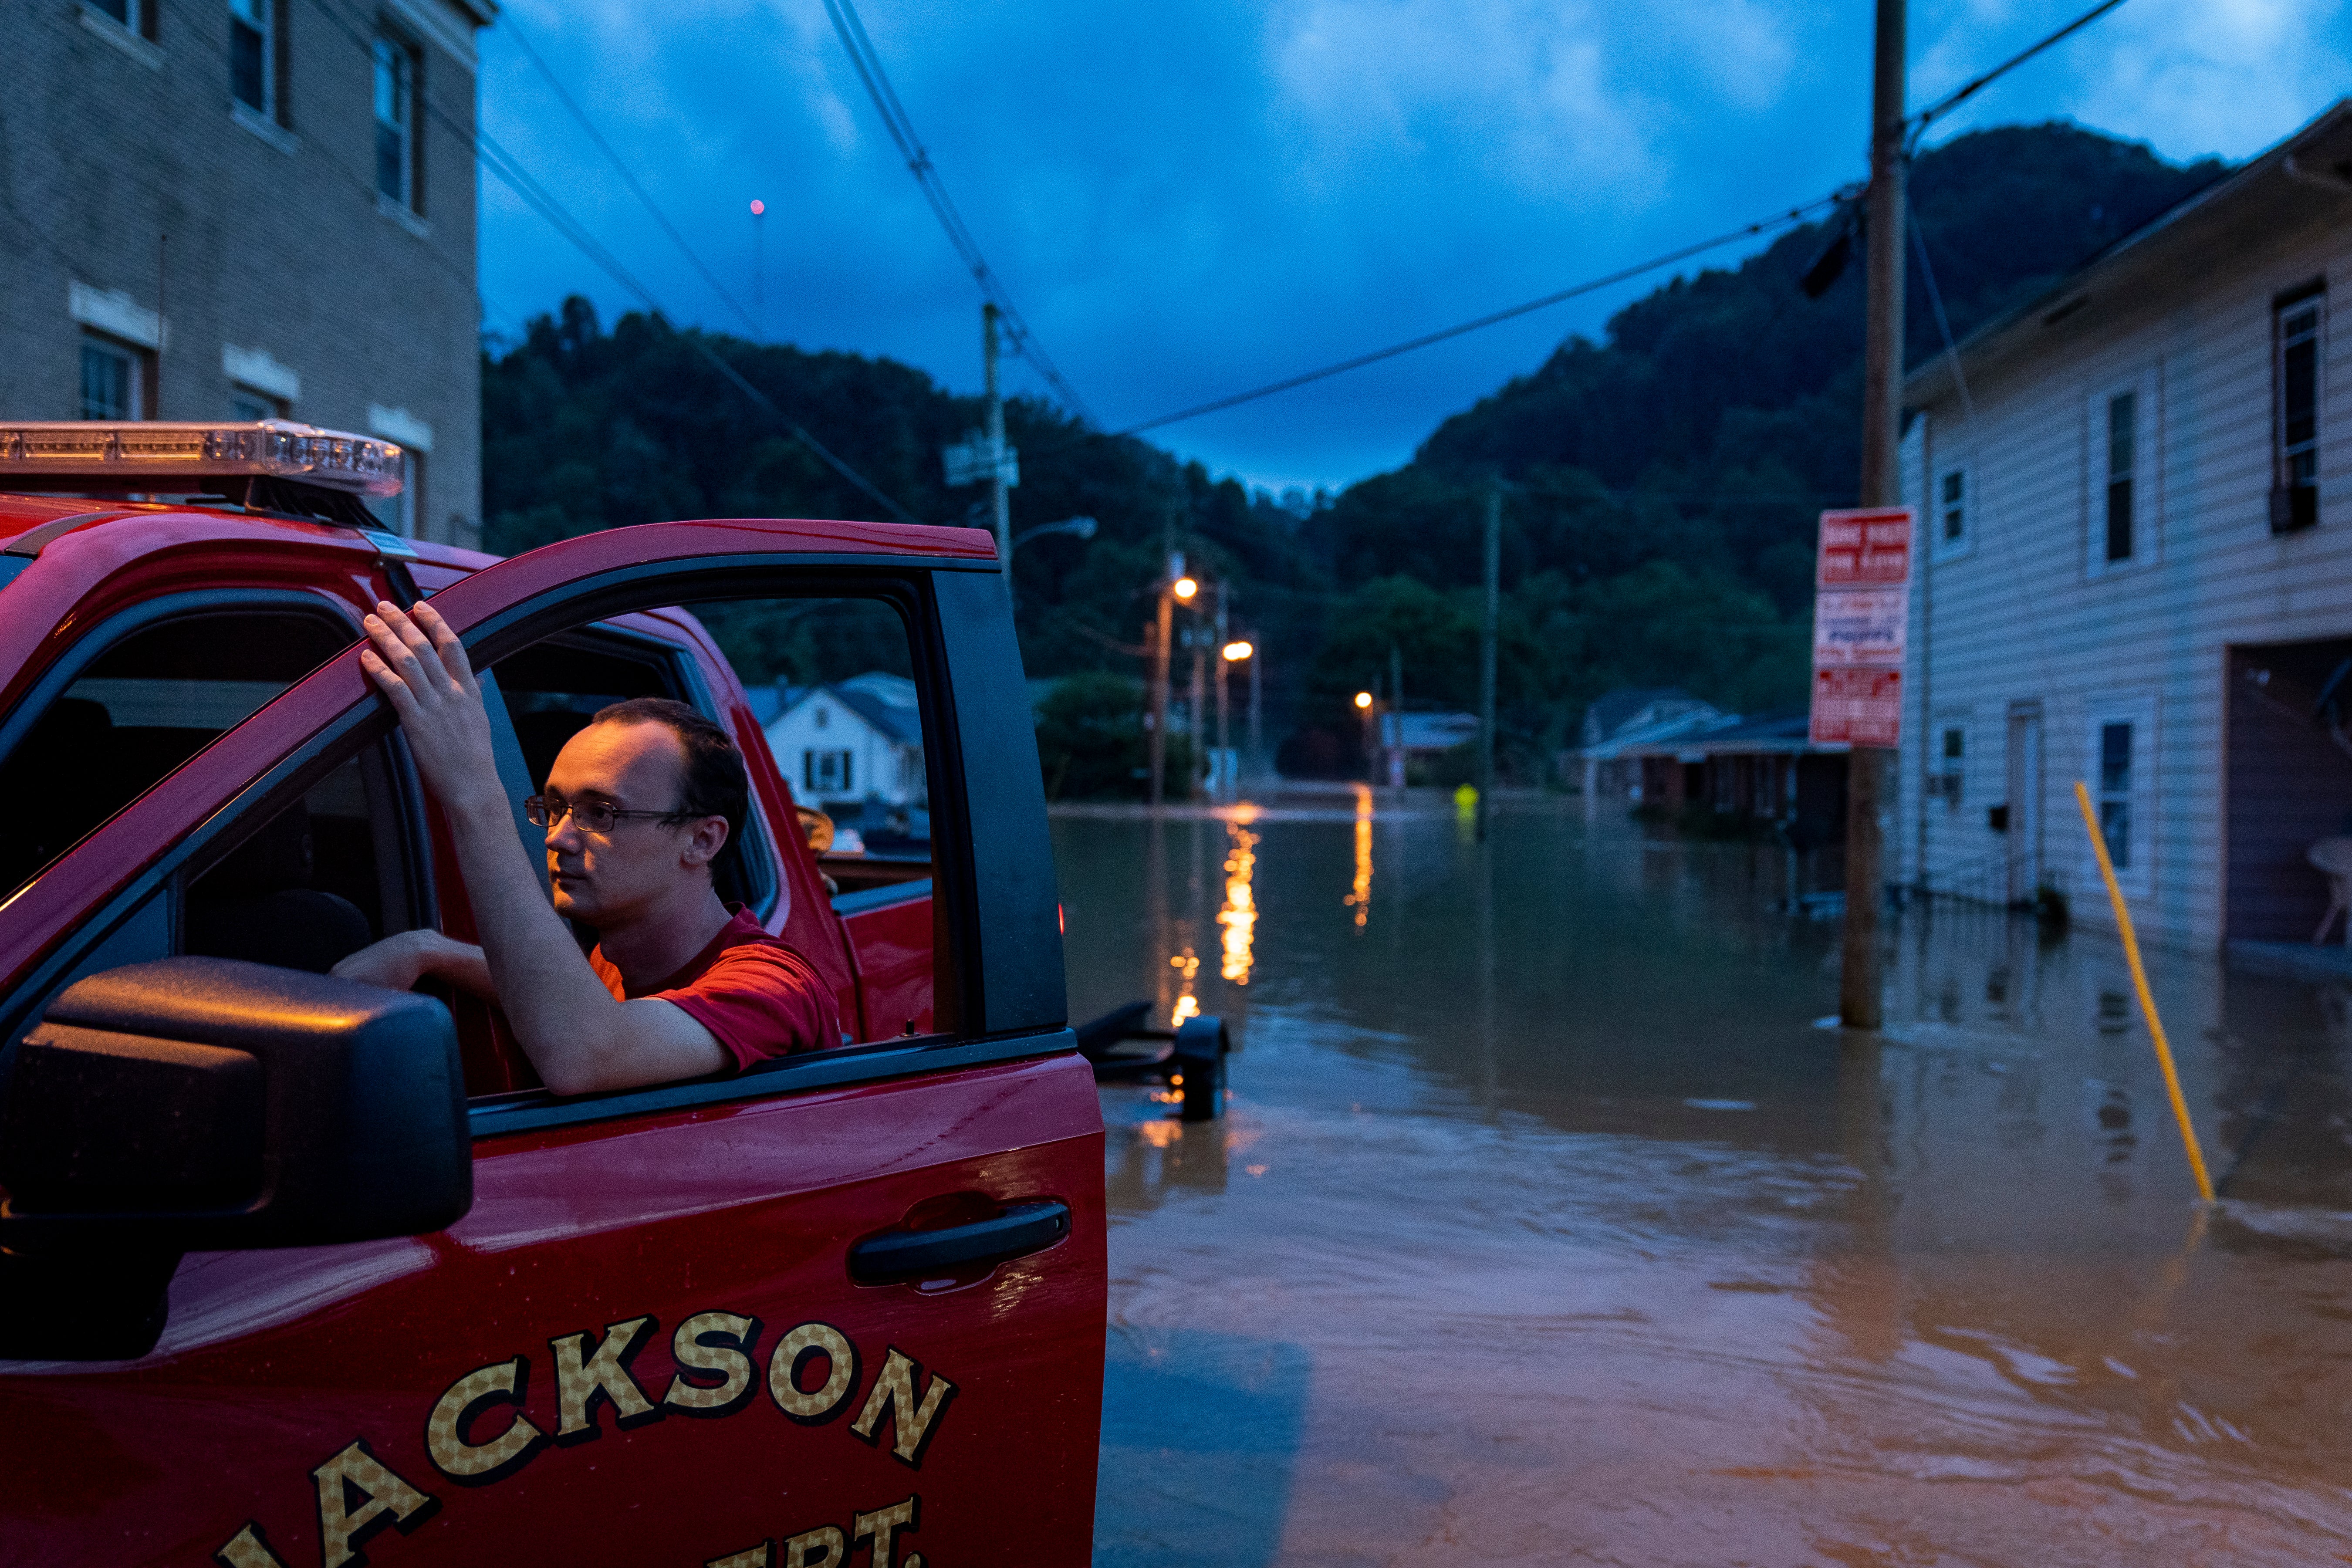 A firefighter with the Jackson Fire Department in front of the flooding in Jackson, Kentucky.  (Photo: Michael Swensen, Getty Images)